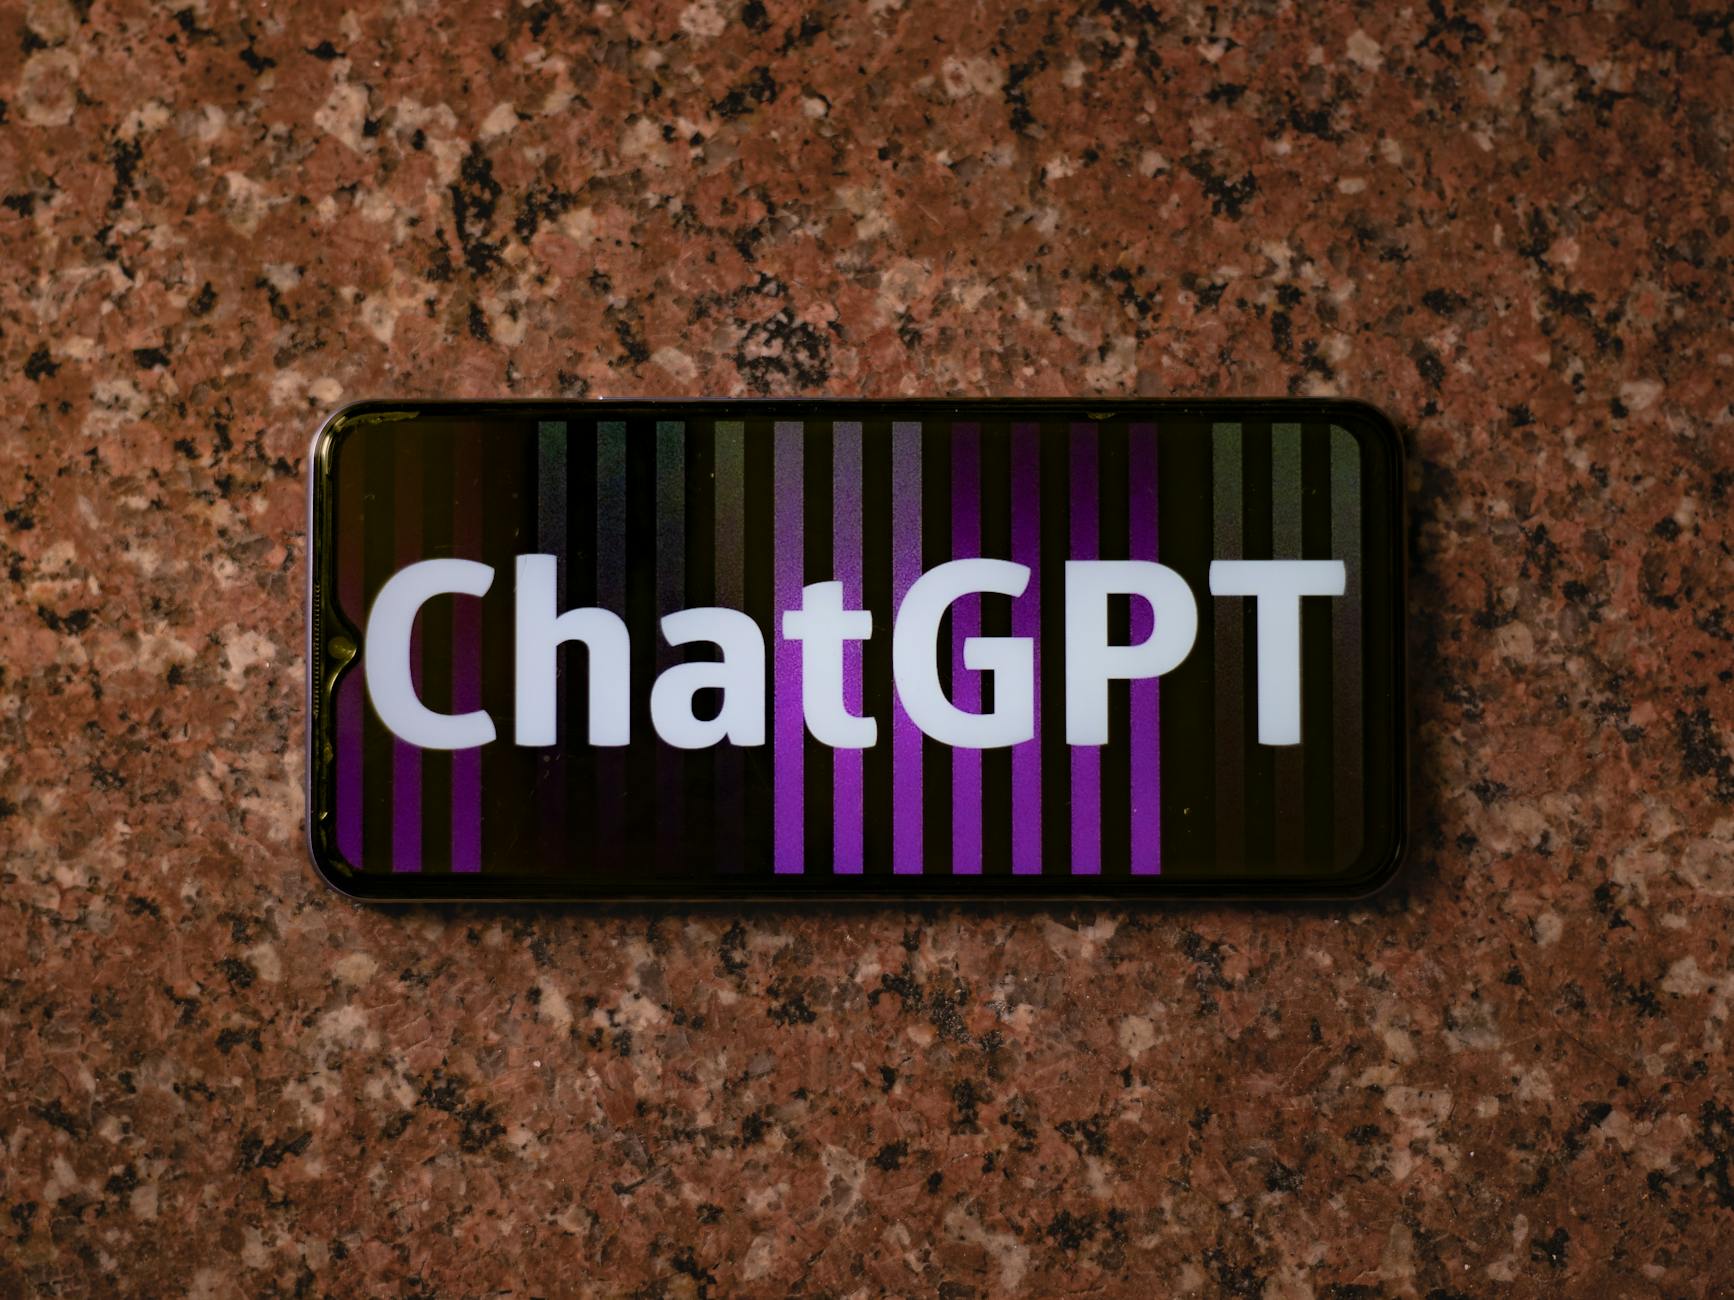 what does chatgpt stand for?